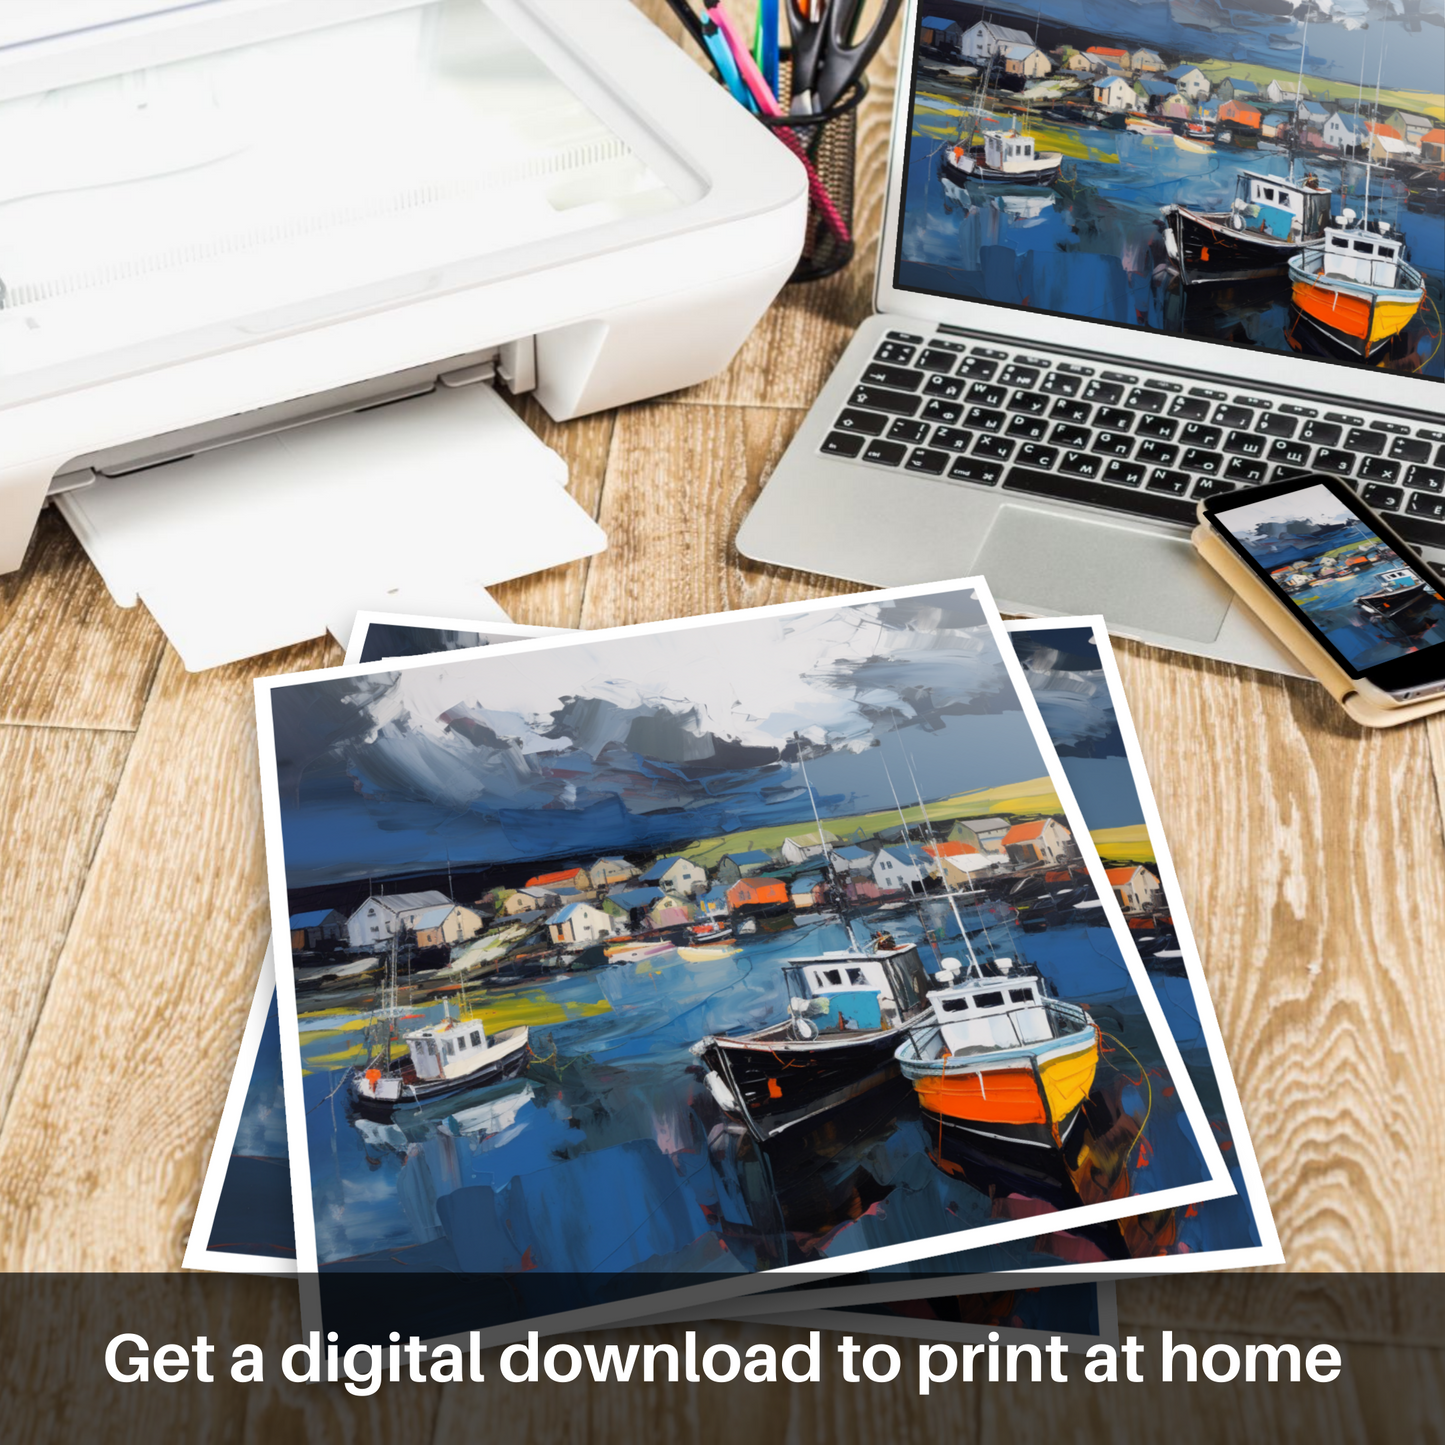 Downloadable and printable picture of St Abba's Harbour with a stormy sky